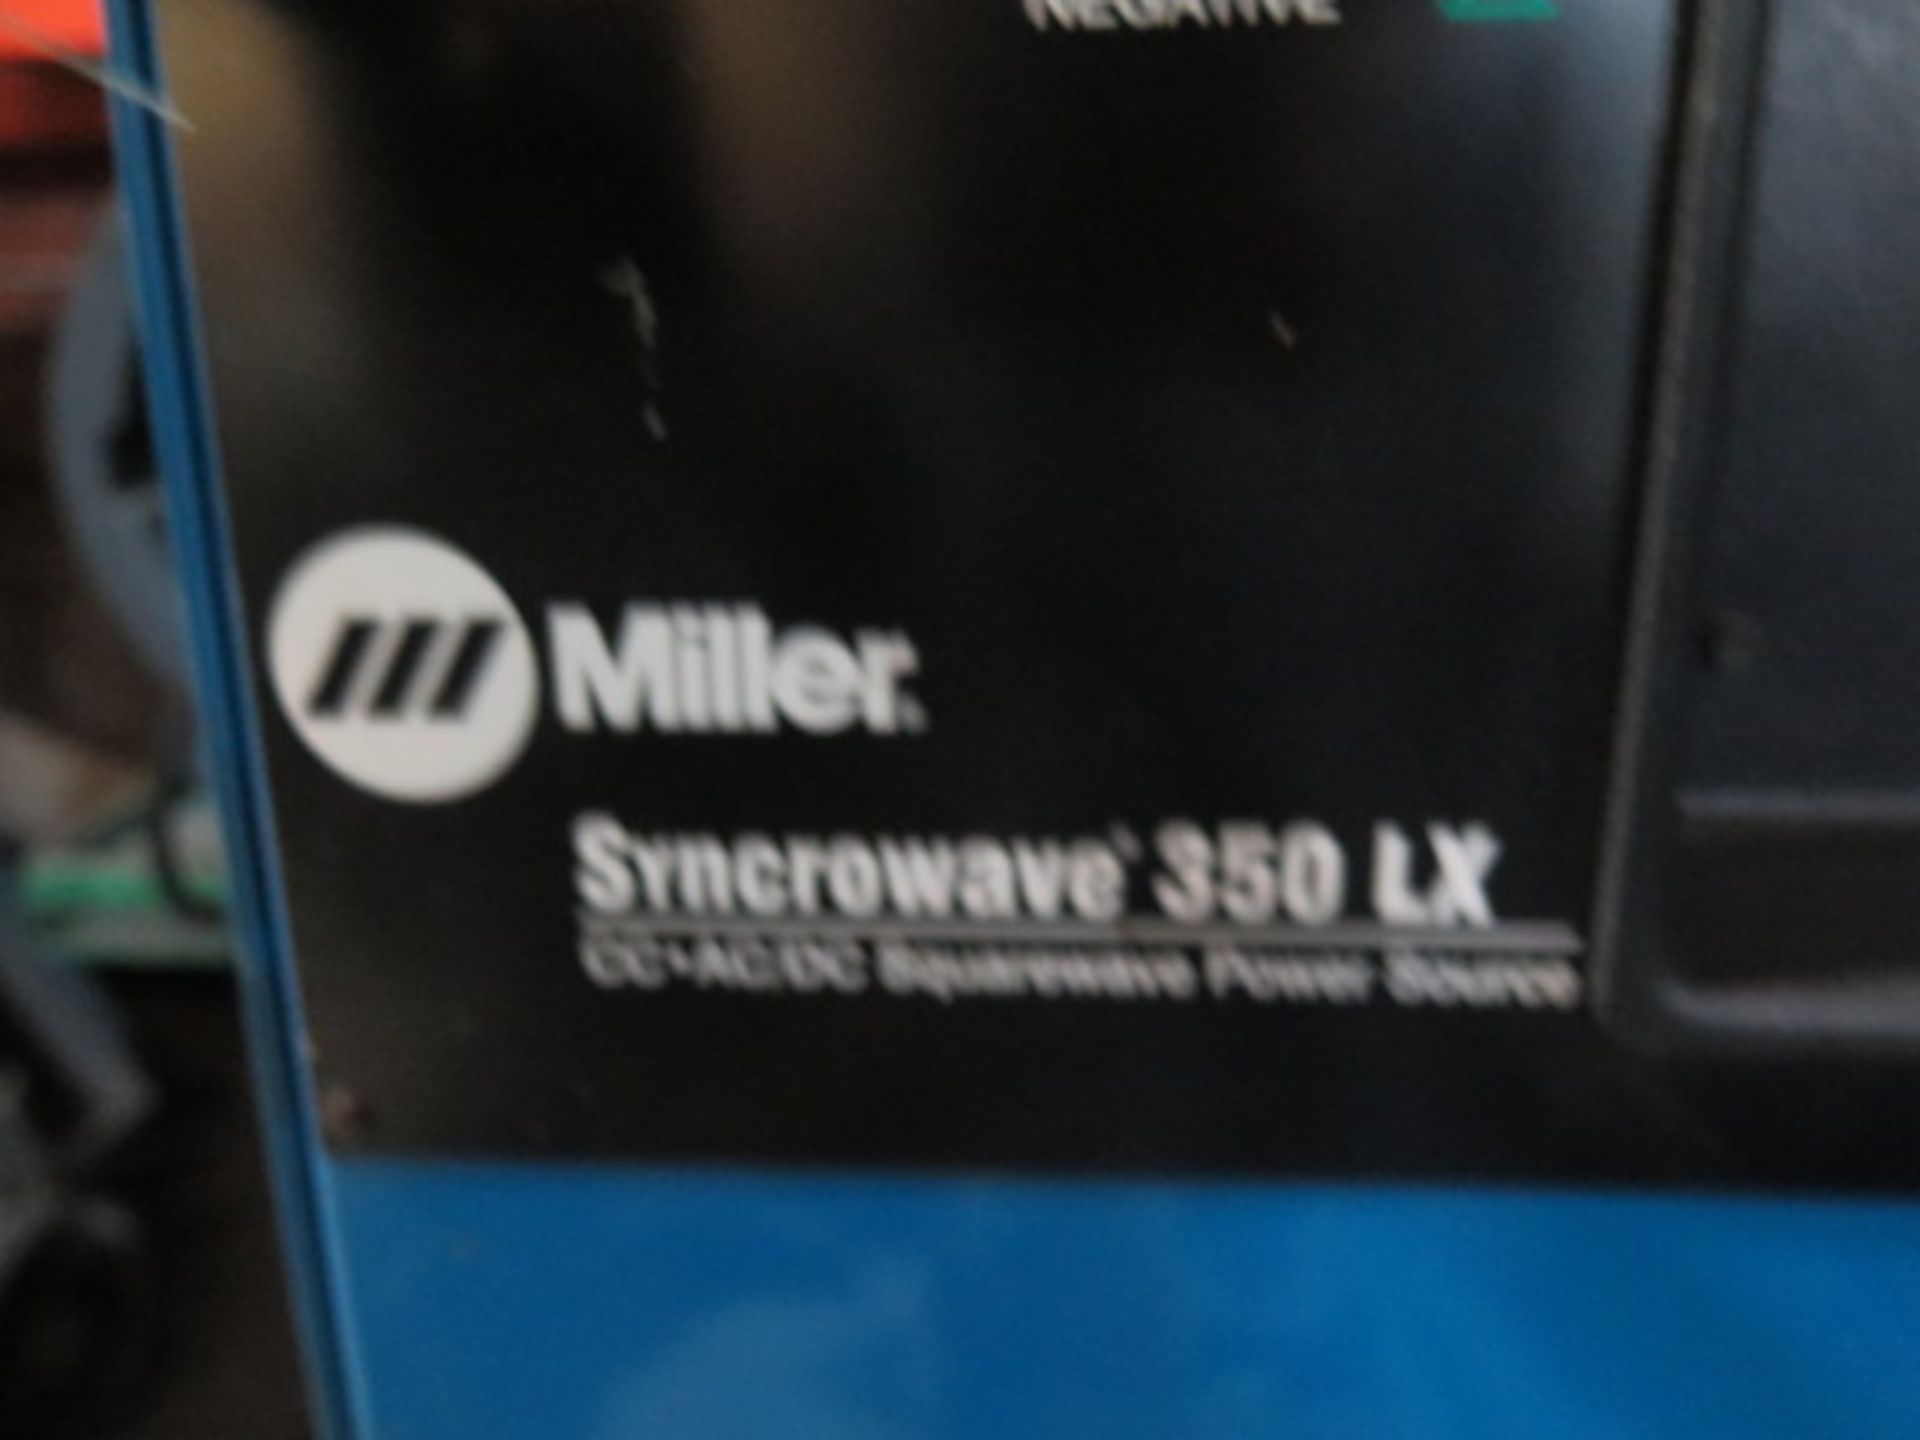 Miller Syncrowave 350LX CC-AC/DC Squarewave Power Source s/n LC096100 w/ Miller Coolmae, SOLD AS IS - Image 7 of 7